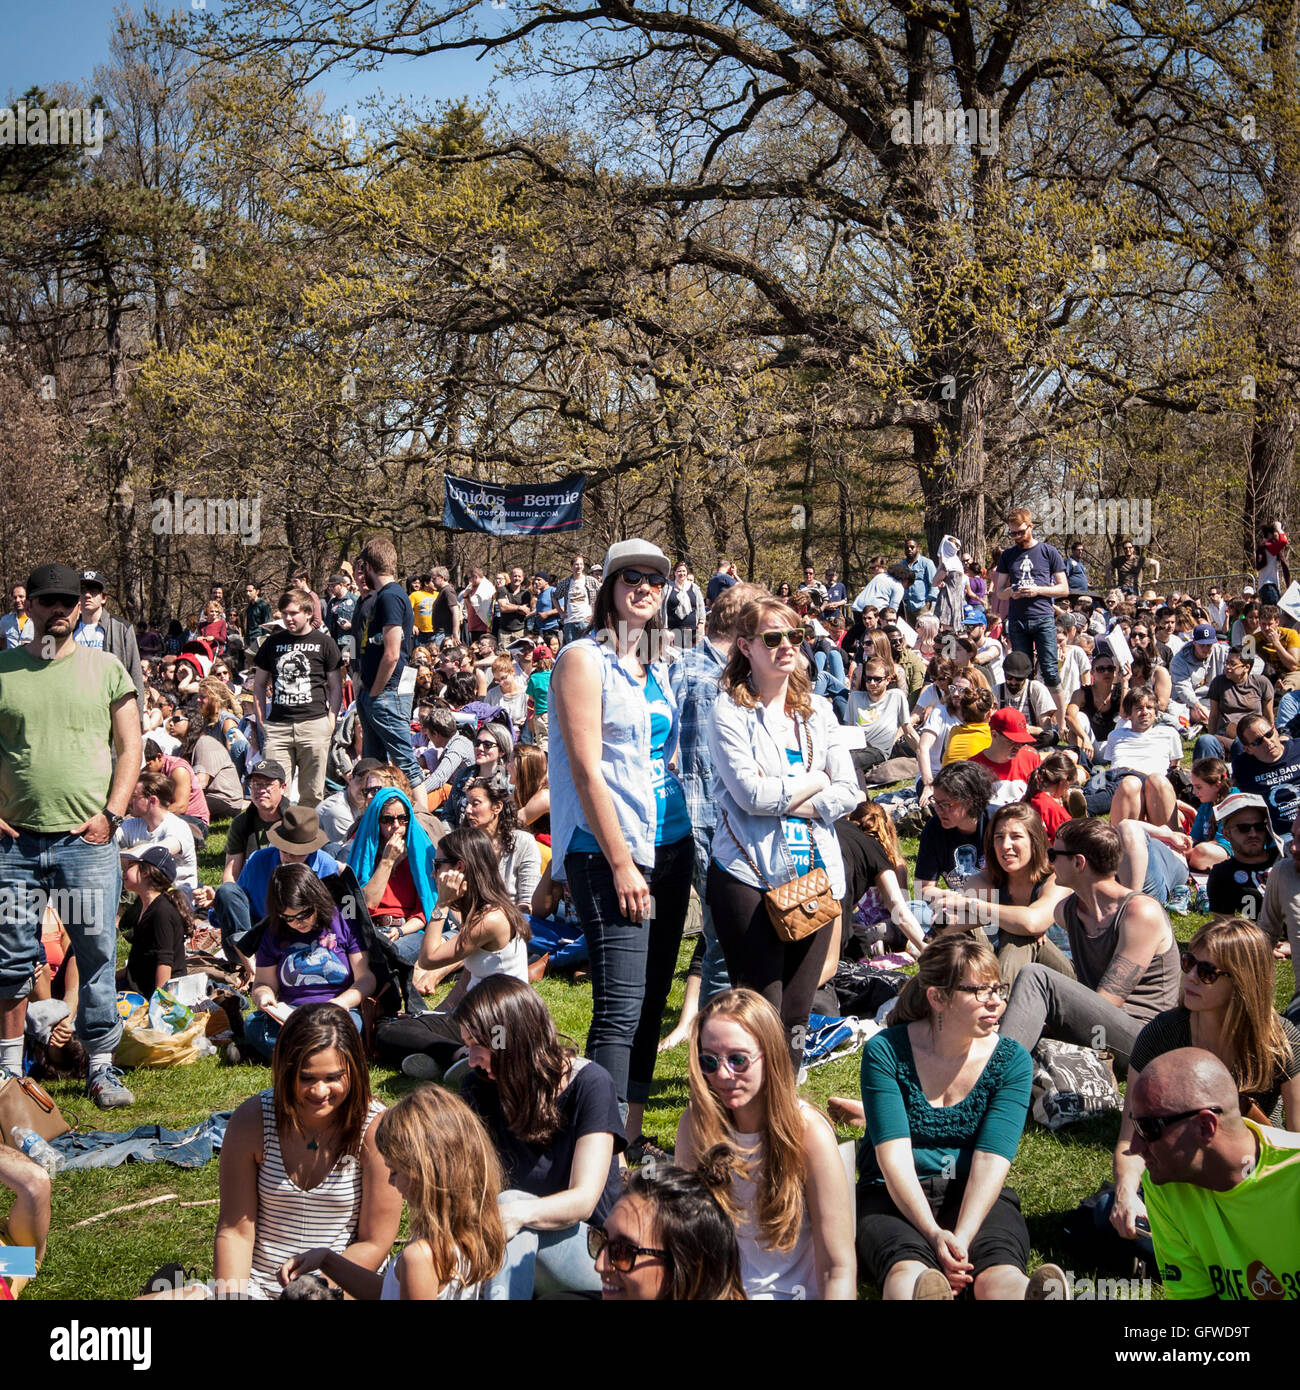 2016 March 17, USA, New York, Brooklyn. Democratic presidential nomination candidate Bernie Sanders rally in Prospect Park. Stock Photo